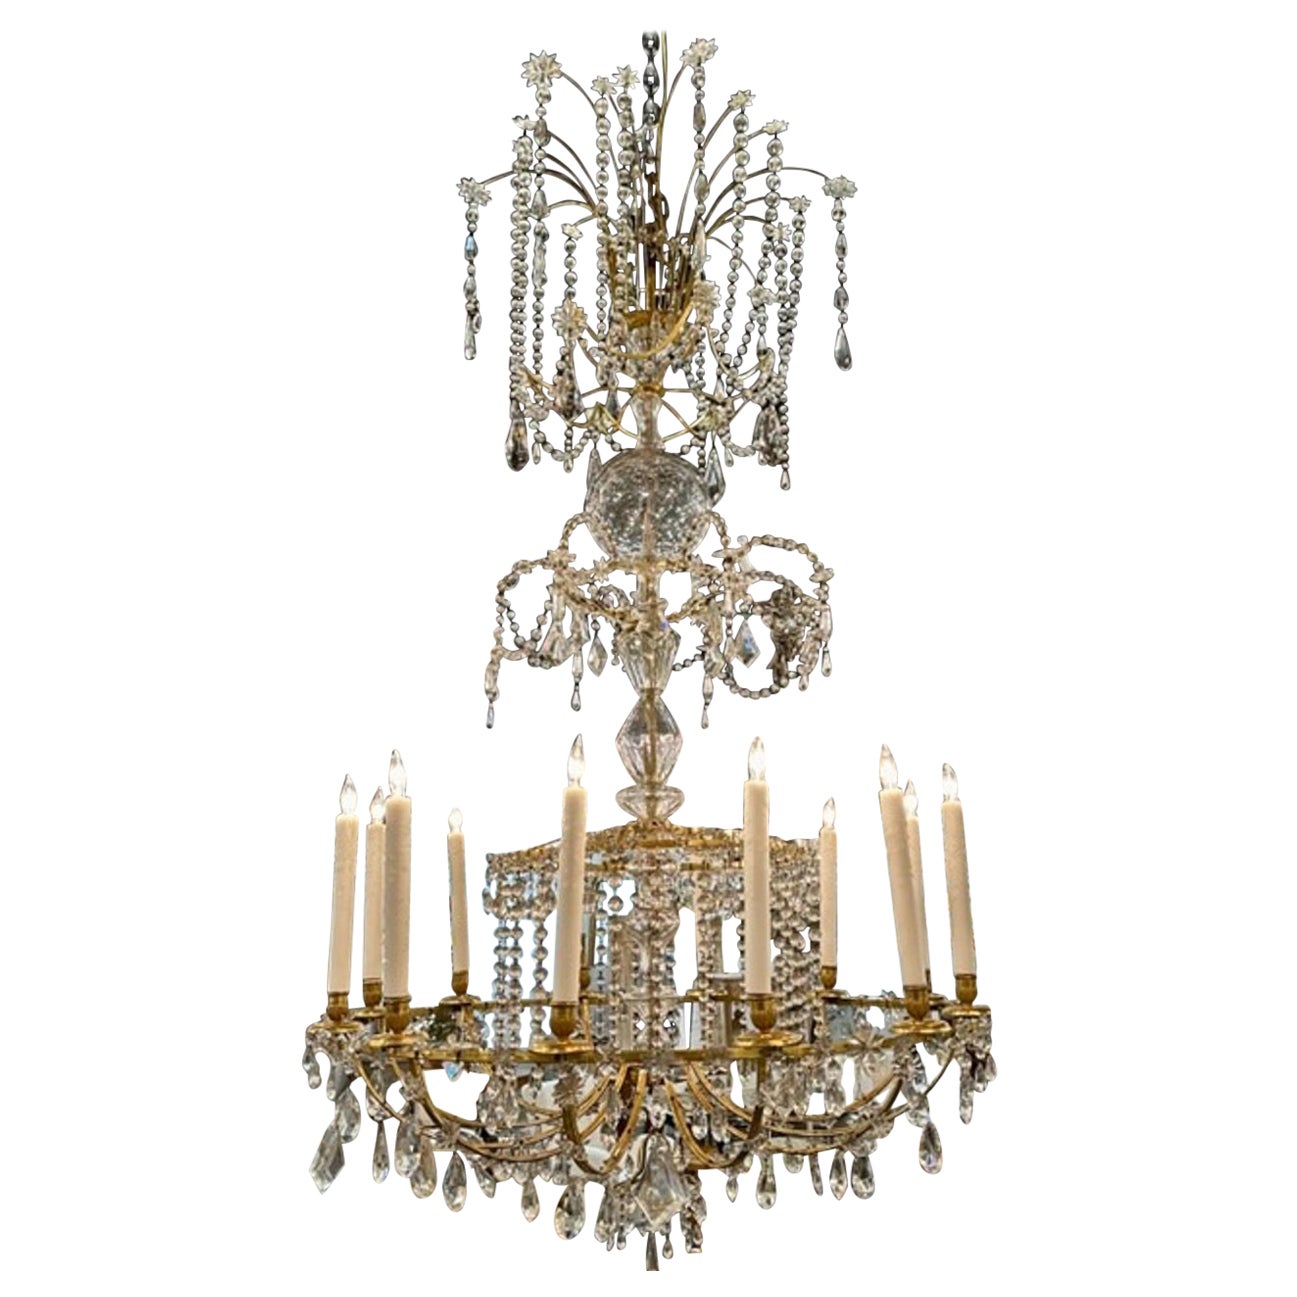 Large Scale 19th Century Russian Gilt Bronze Chandelier For Sale